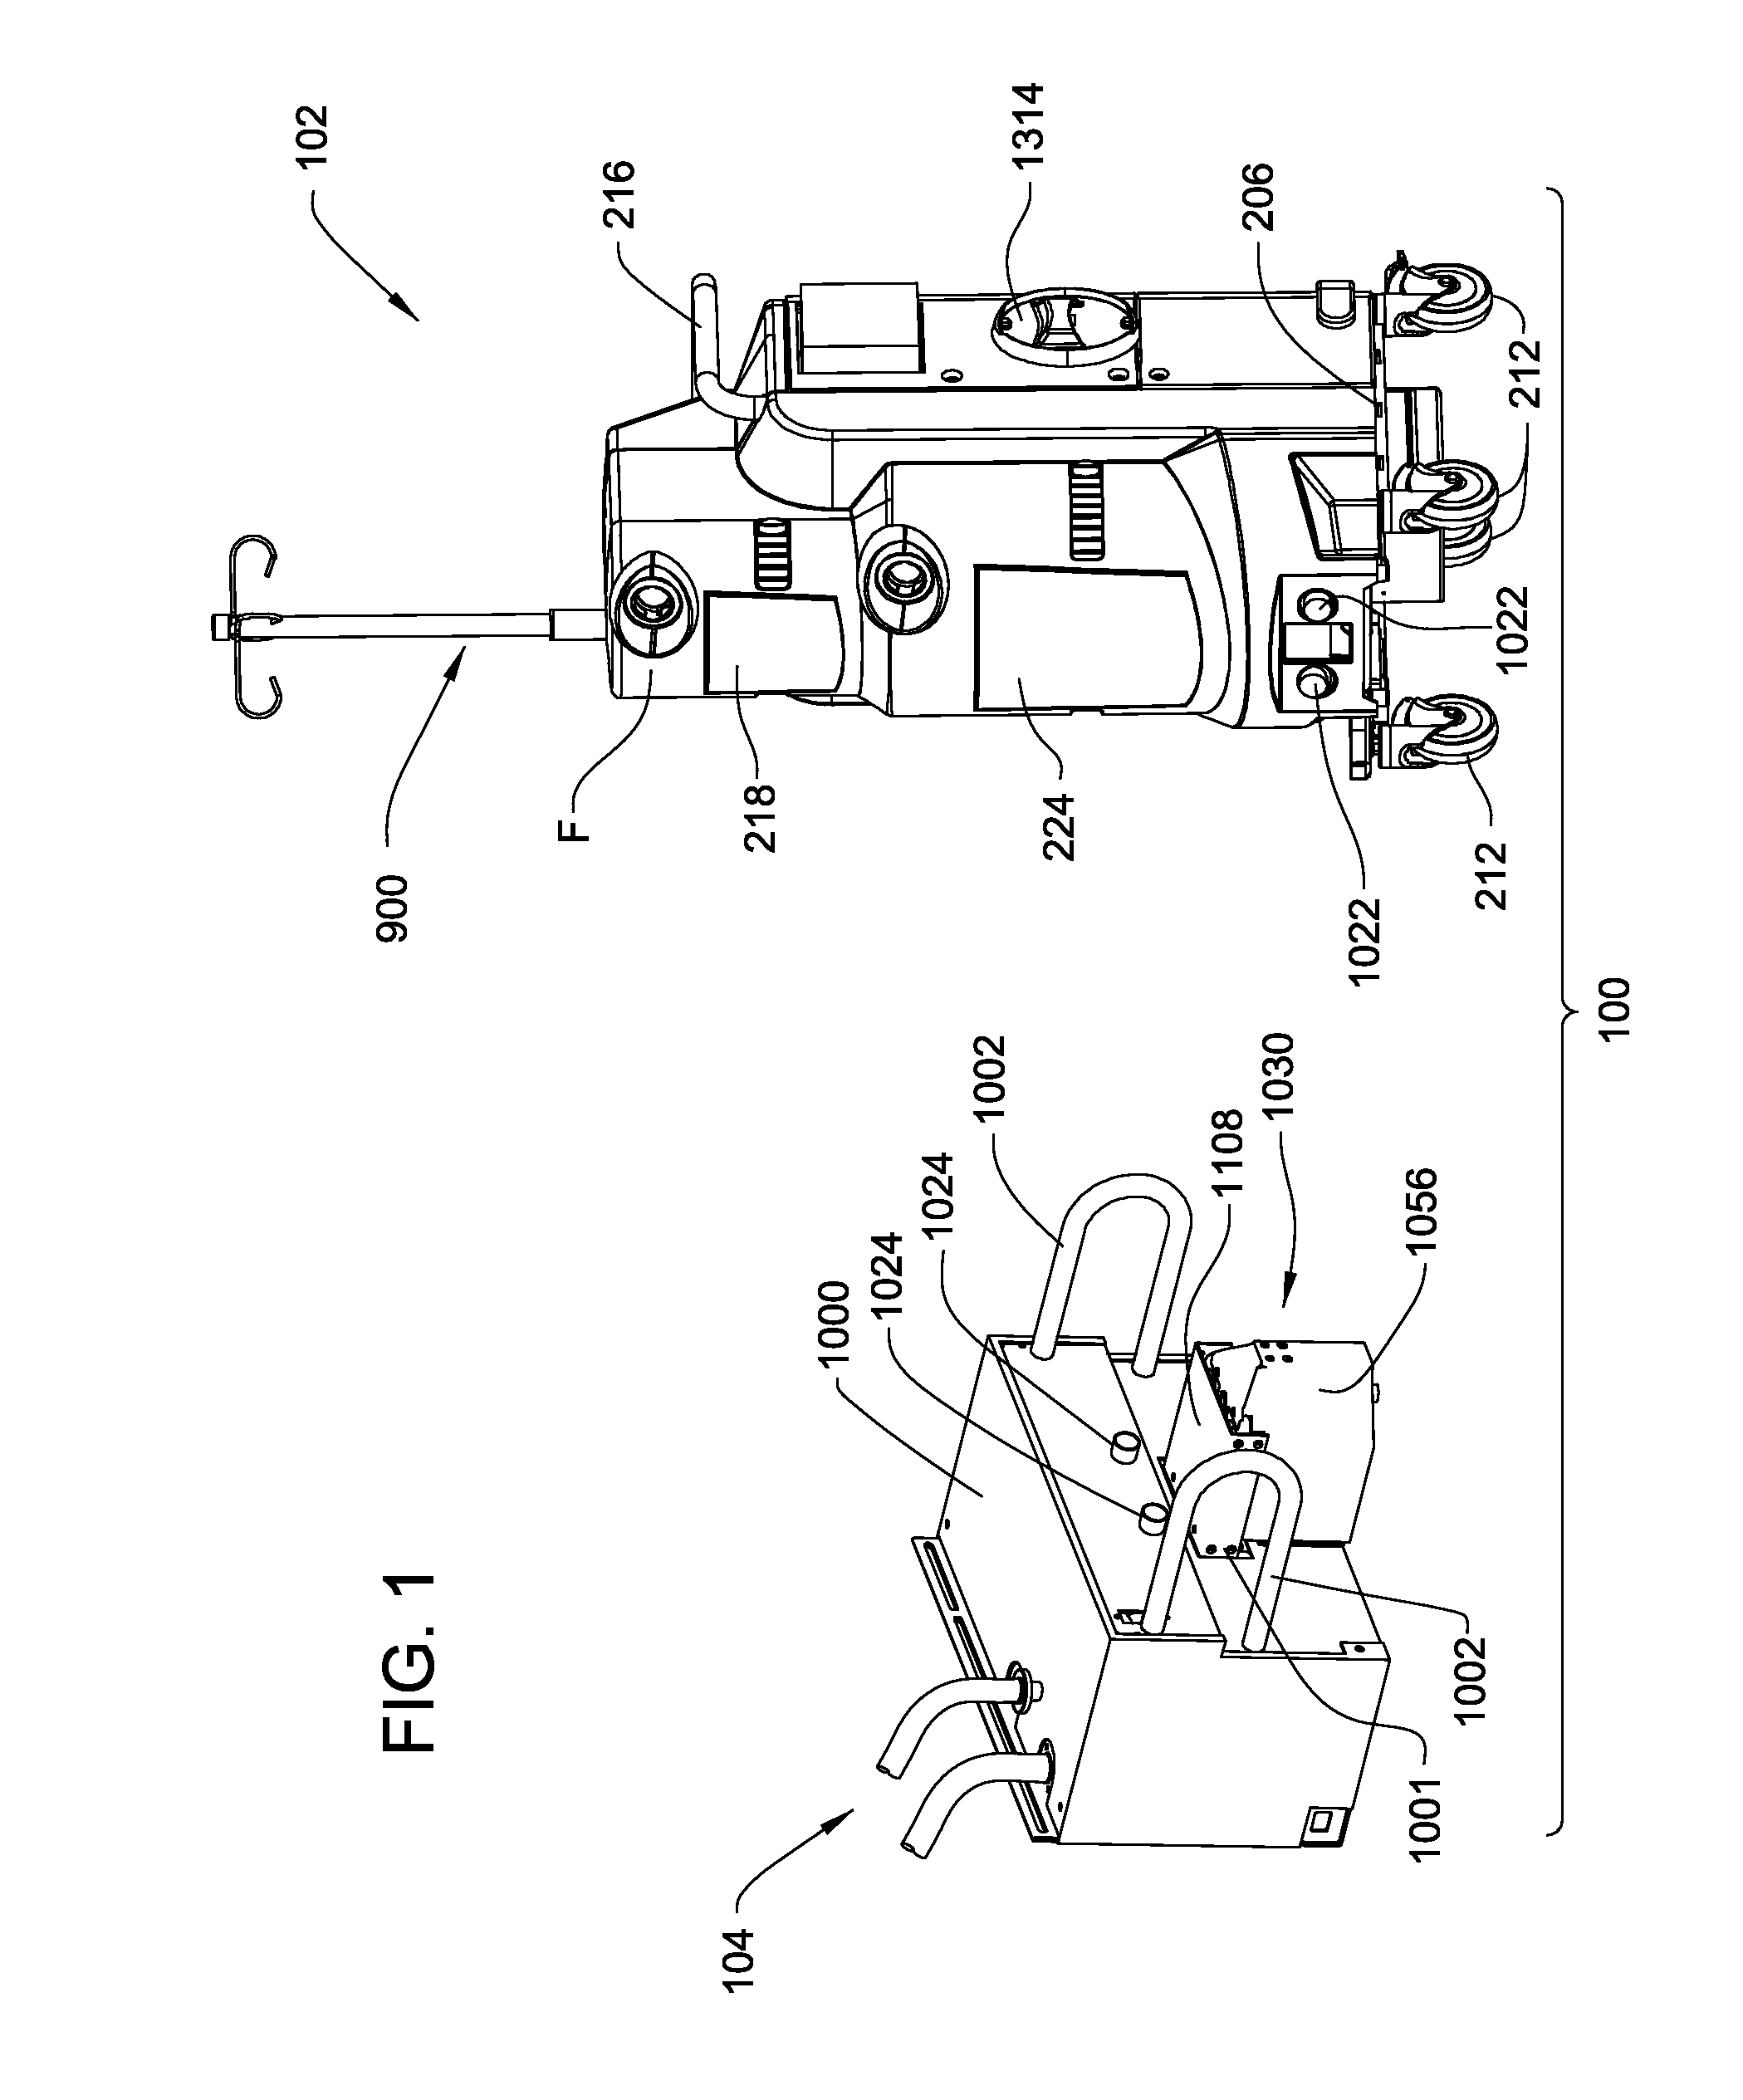 Medical/surgical waste collection and disposal system including waste containers of different storage volumes with inter-container transfer valve and independently controlled vacuum levels